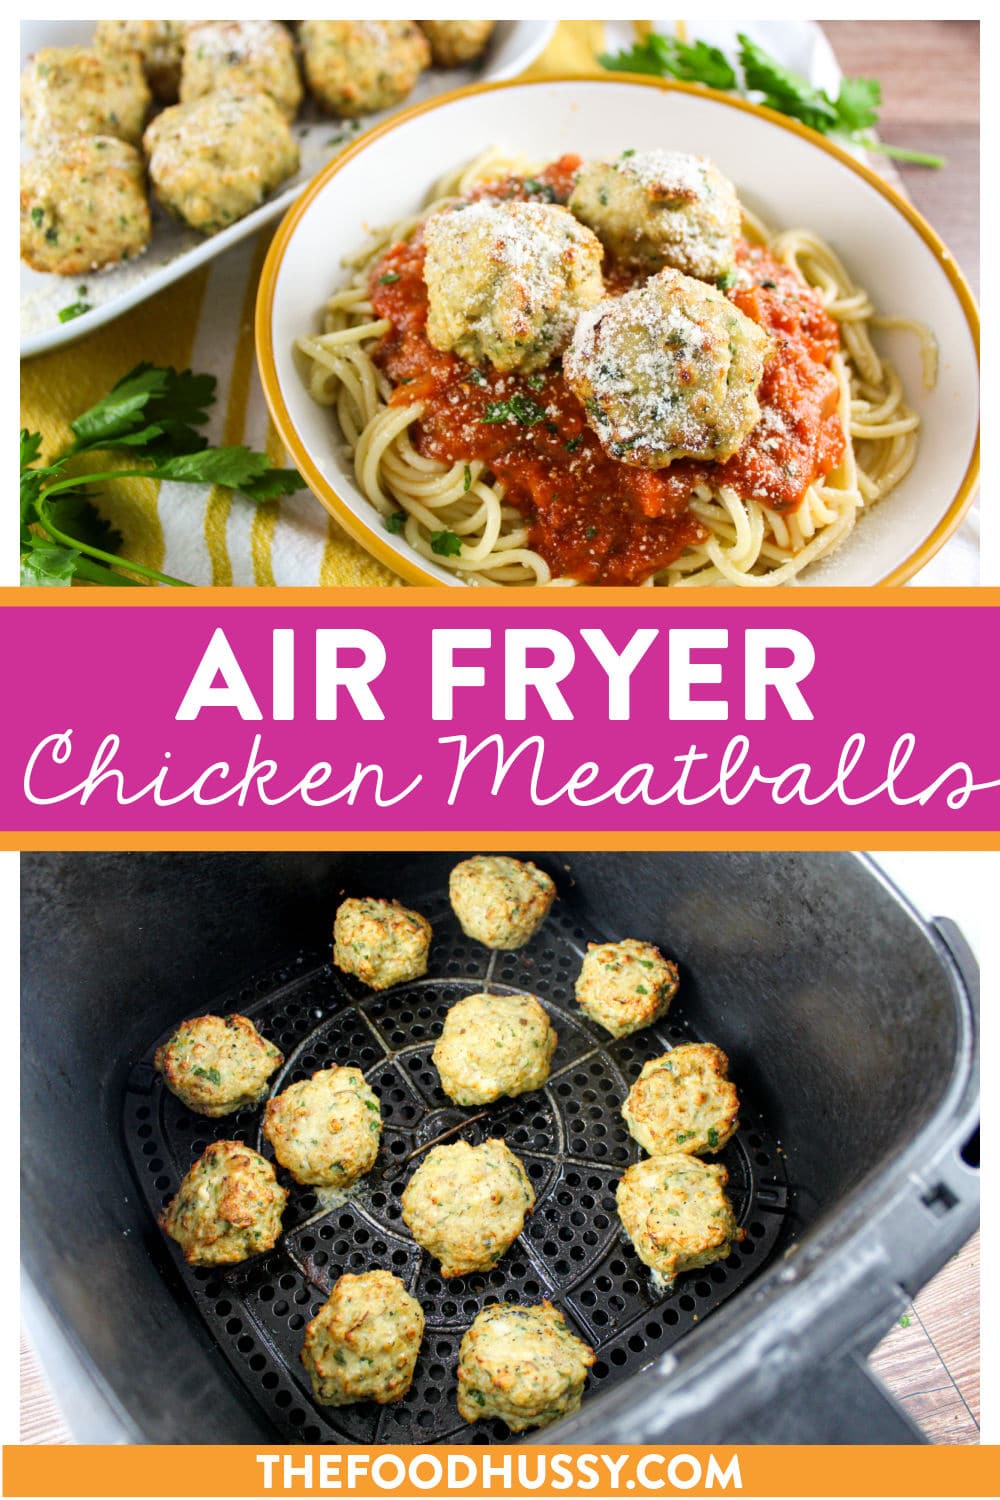 These Air Fryer Chicken Meatballs are a new favorite! Light and full of flavor from all the fresh herbs. They're great with pasta, on a sandwich or as an appetizer! (And they're healthy!) via @foodhussy